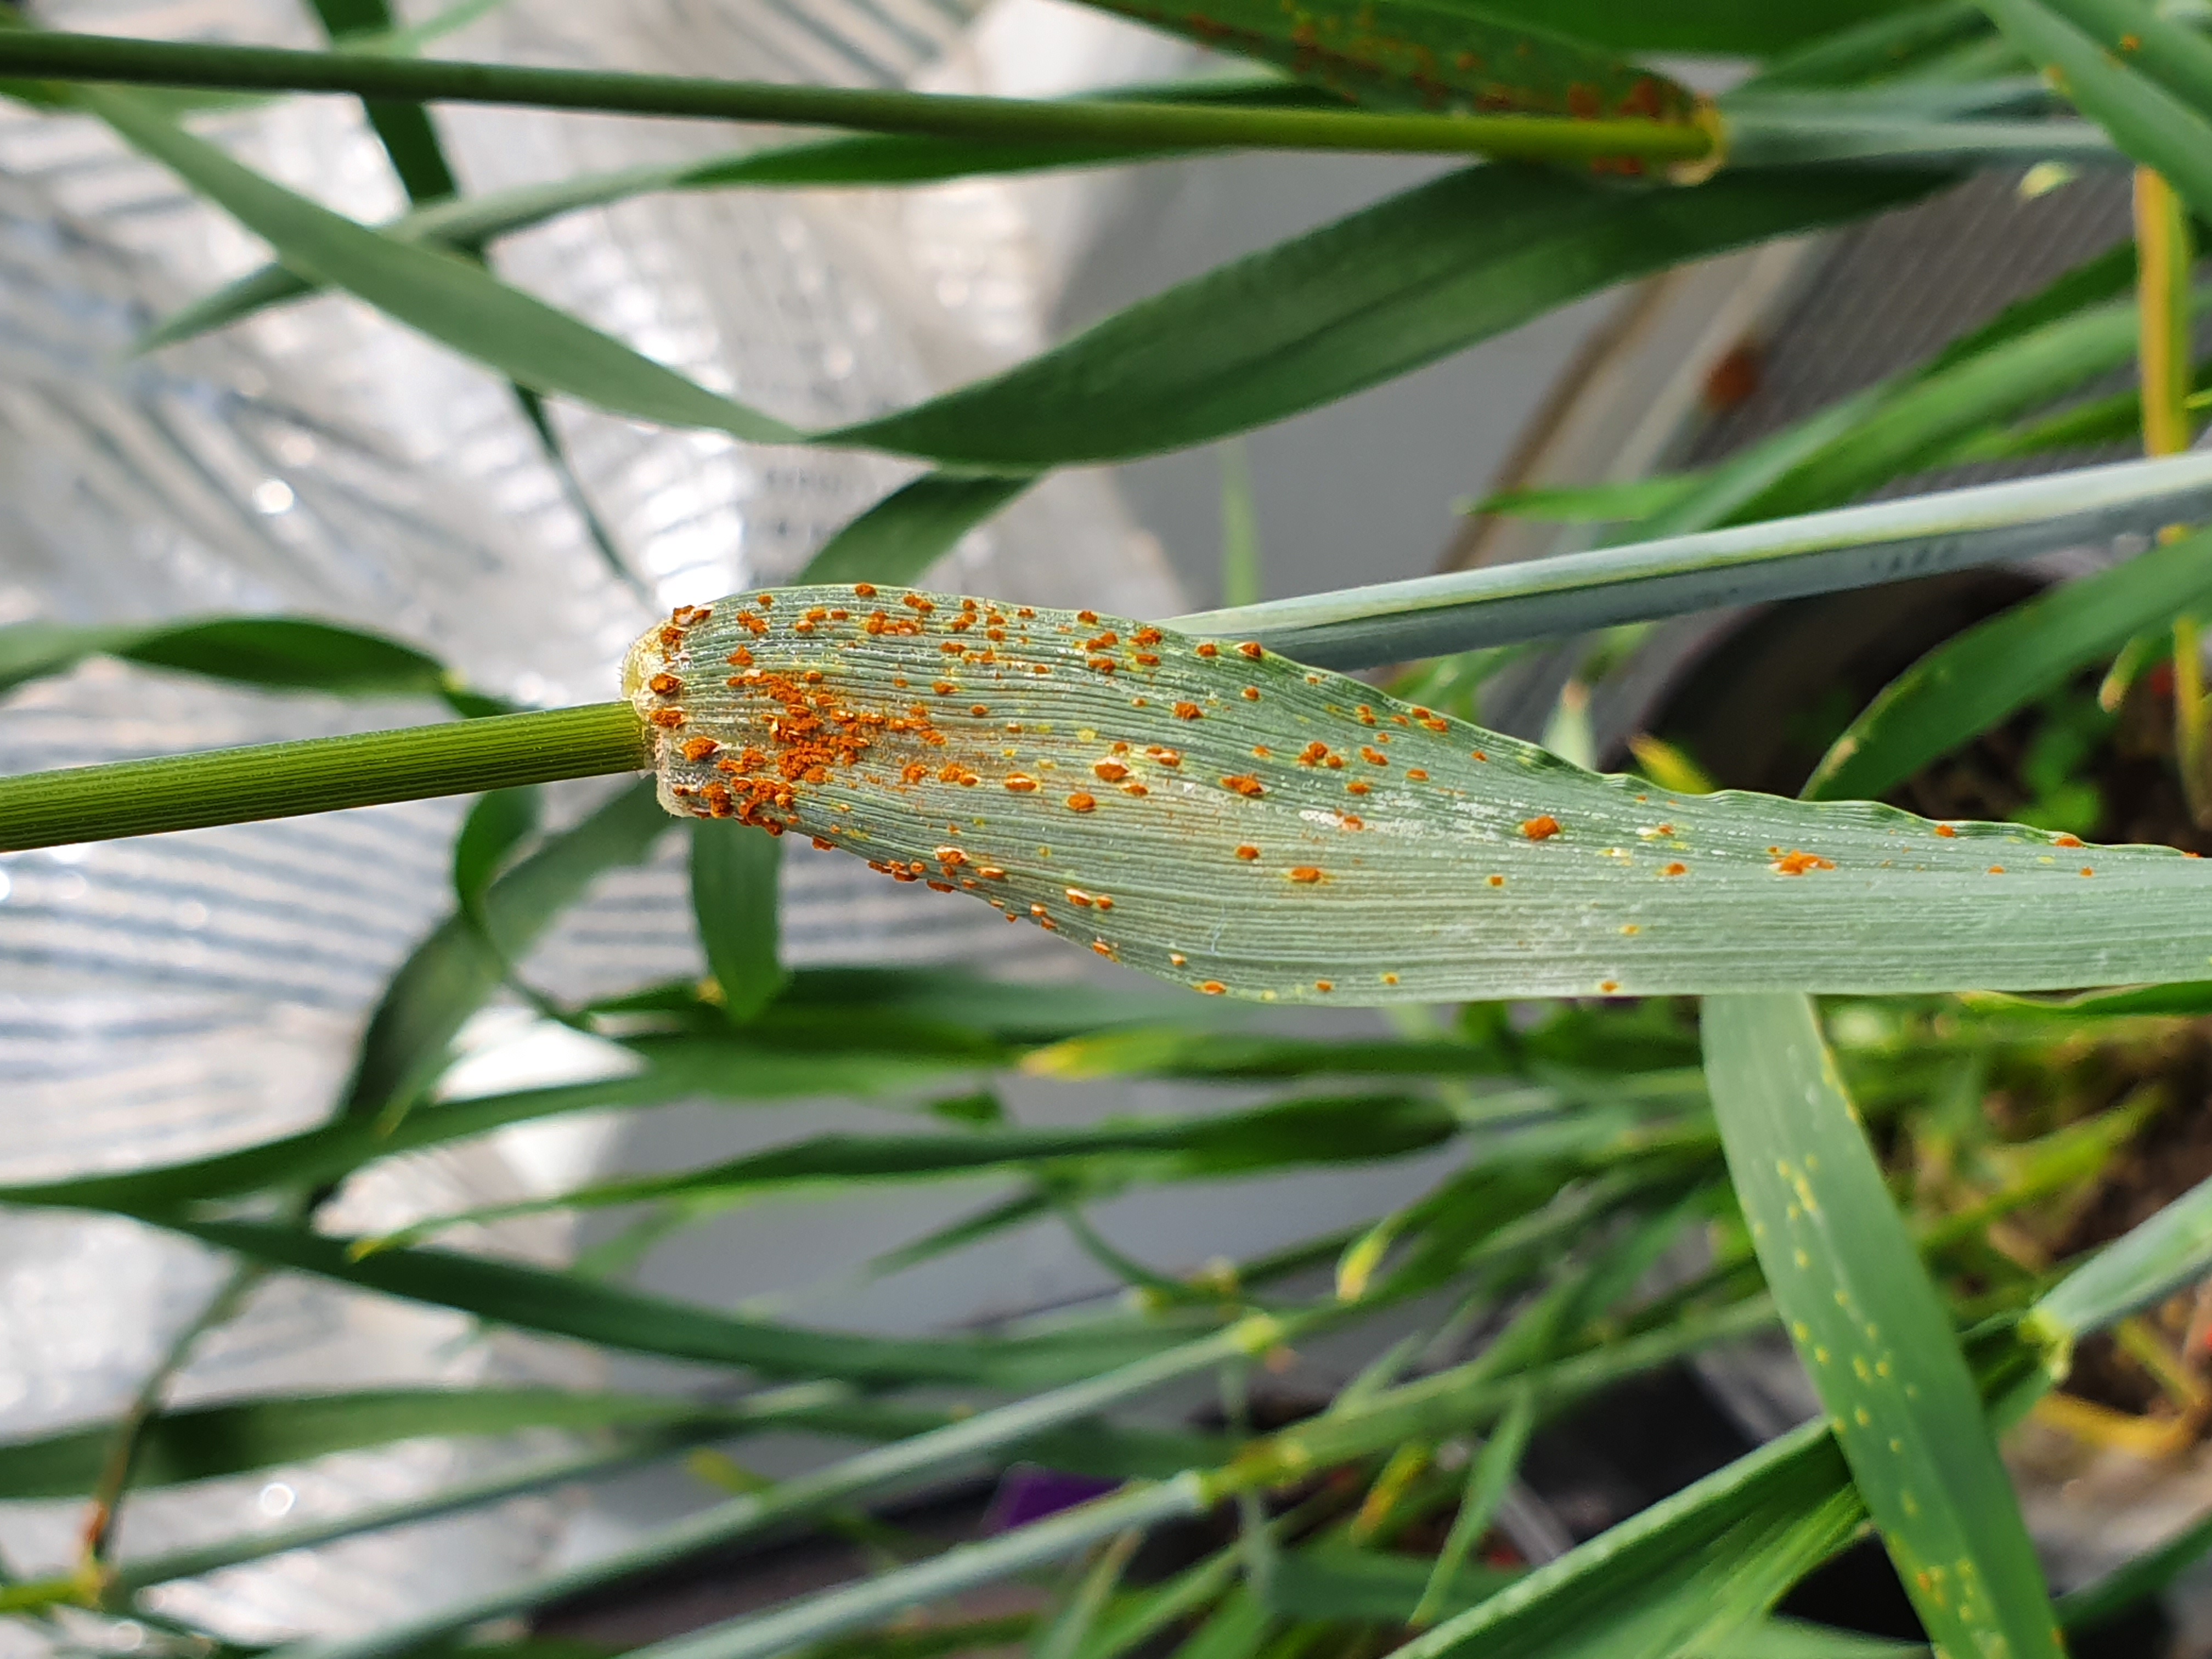 Puccinia triticina on wheat. Image by Rohit Mago.